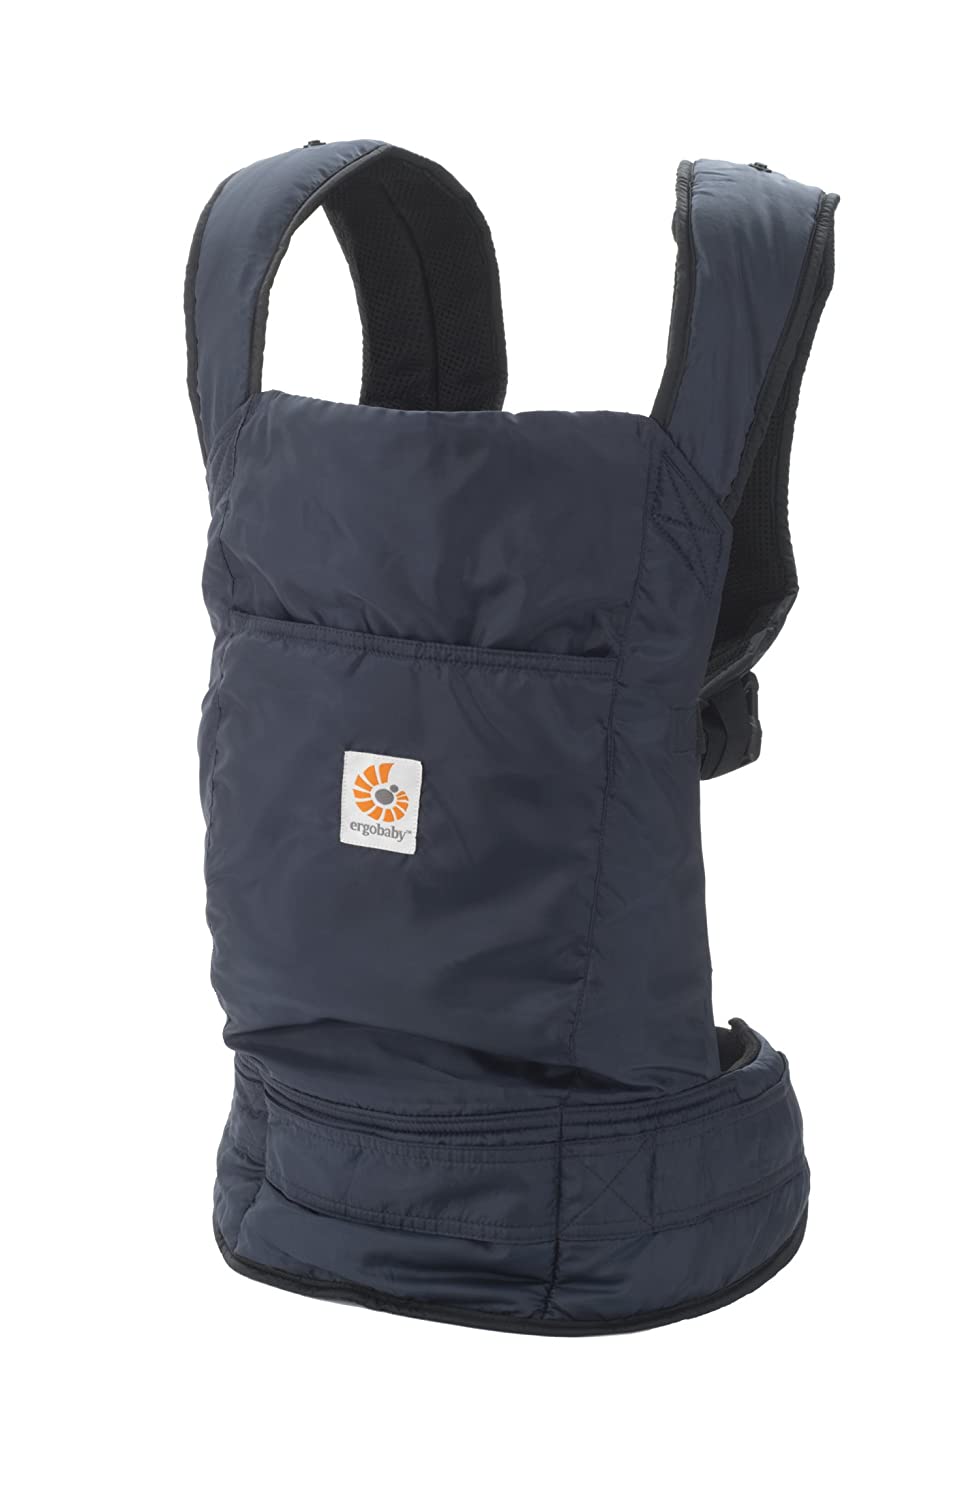 Ergobaby EBBCTS410001 Travel Baby Carrier Navy